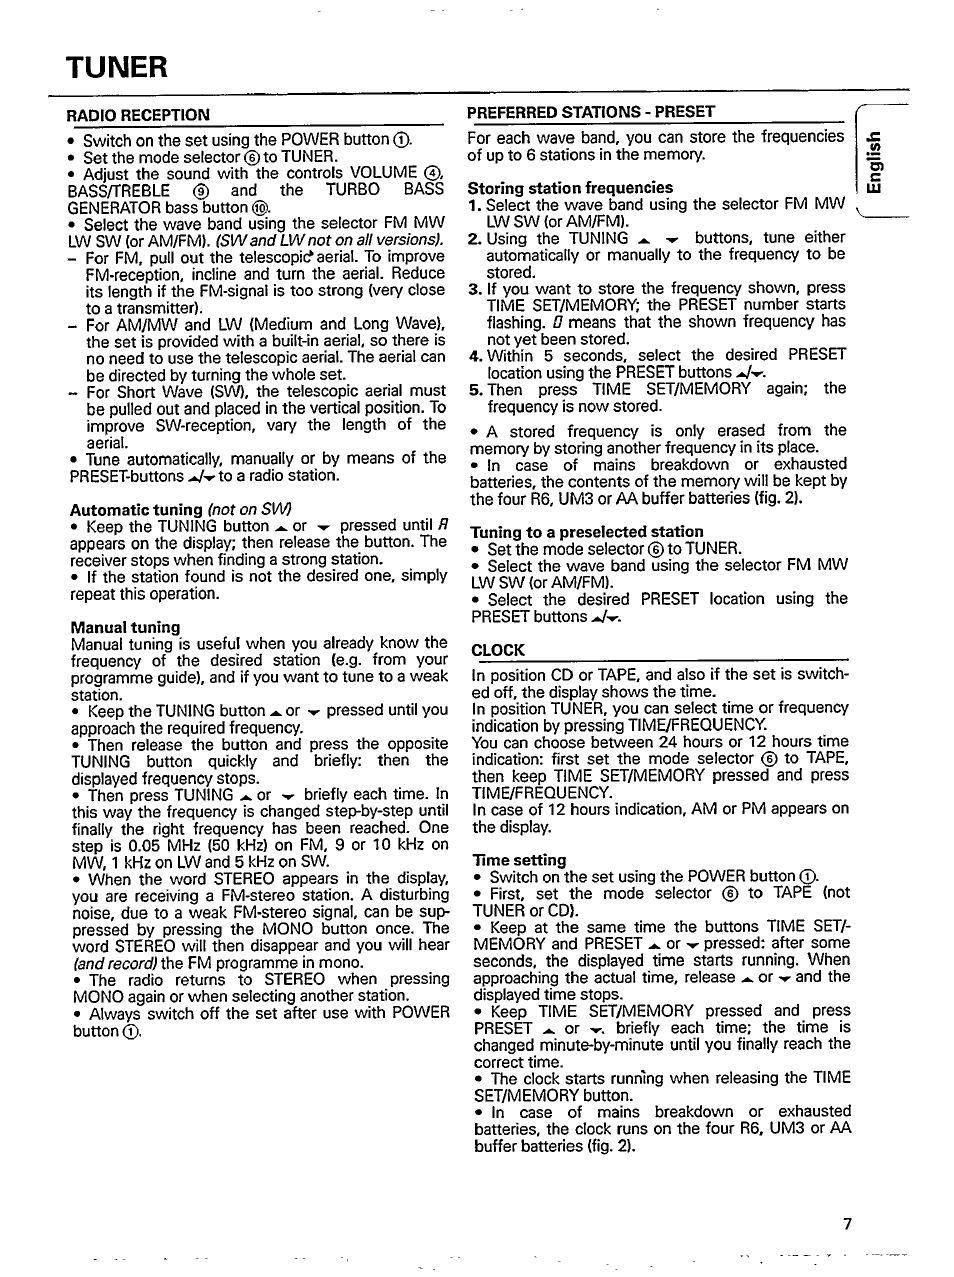 Tuner, Preferred stations - preset, Manual tuning | Storing station frequencies, Tuning to a preselected station, Clock, Time setting | Philips AZ 8210 User Manual | Page 7 / 14